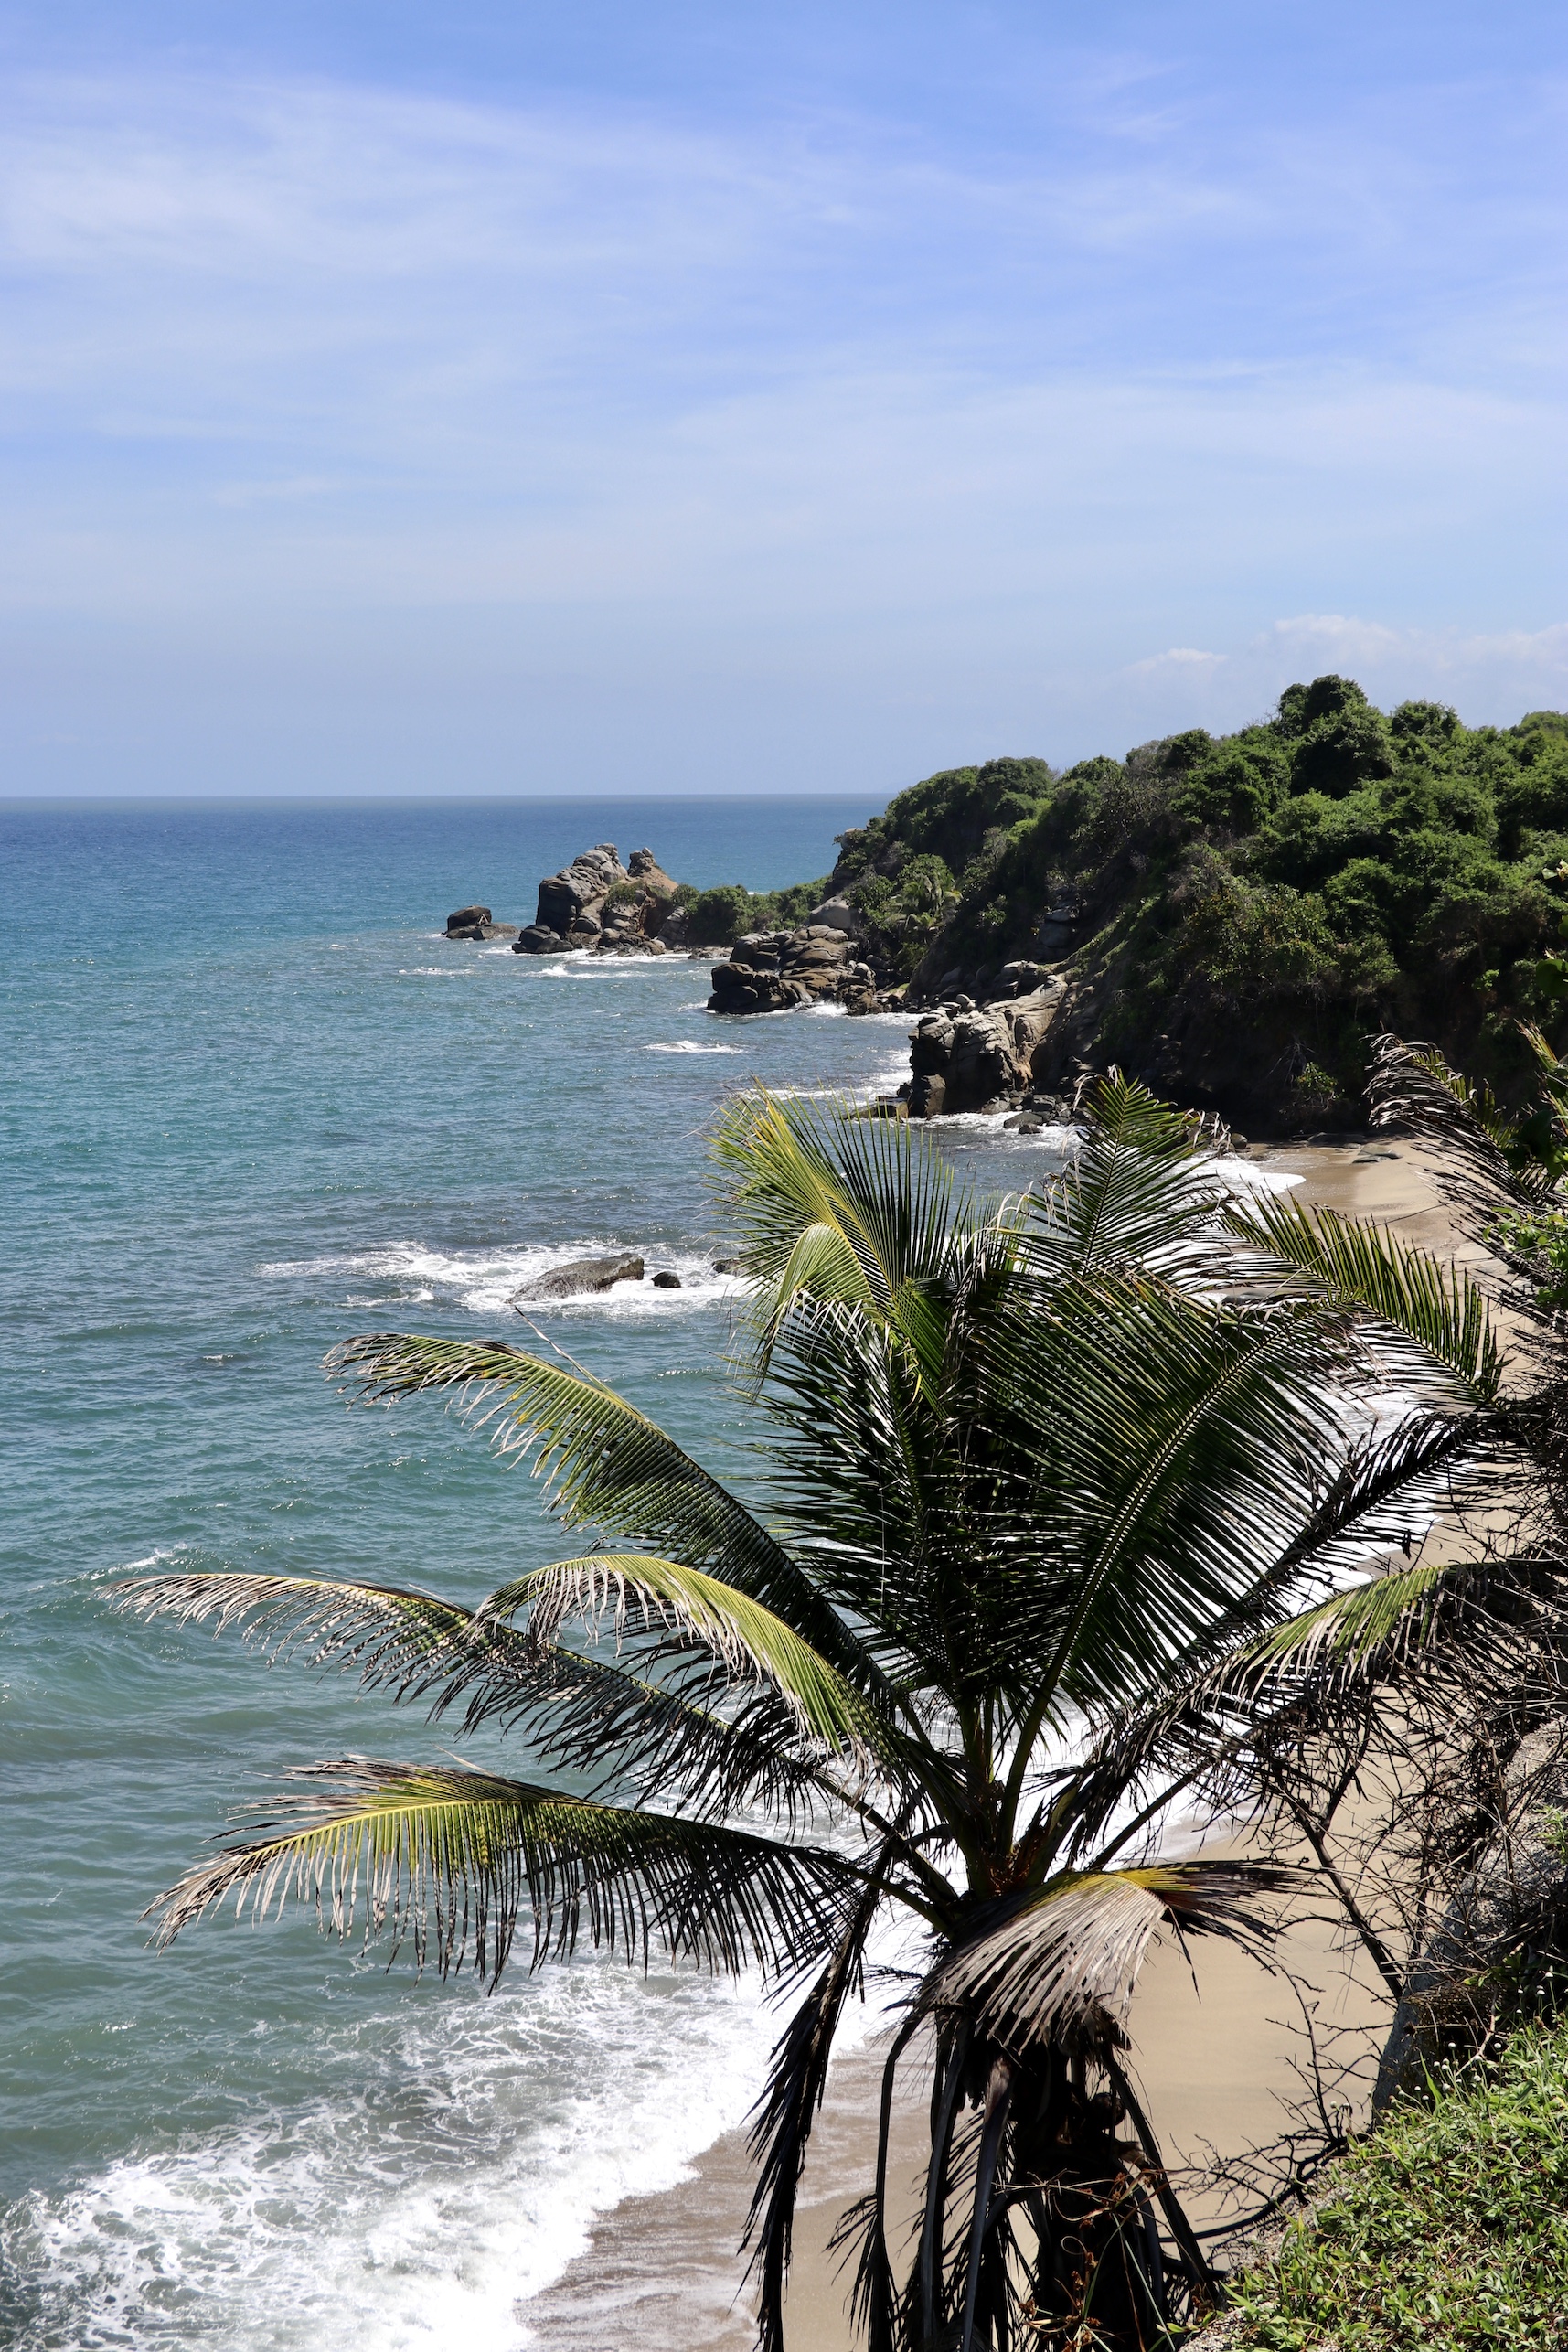 After these adventures it is time for some relaxation, where can you do this better than at the beach? In the Tayrona National Park in the north you find some of the most beautiful beaches of Colombia, surrounded by protected jungle and its fauna.